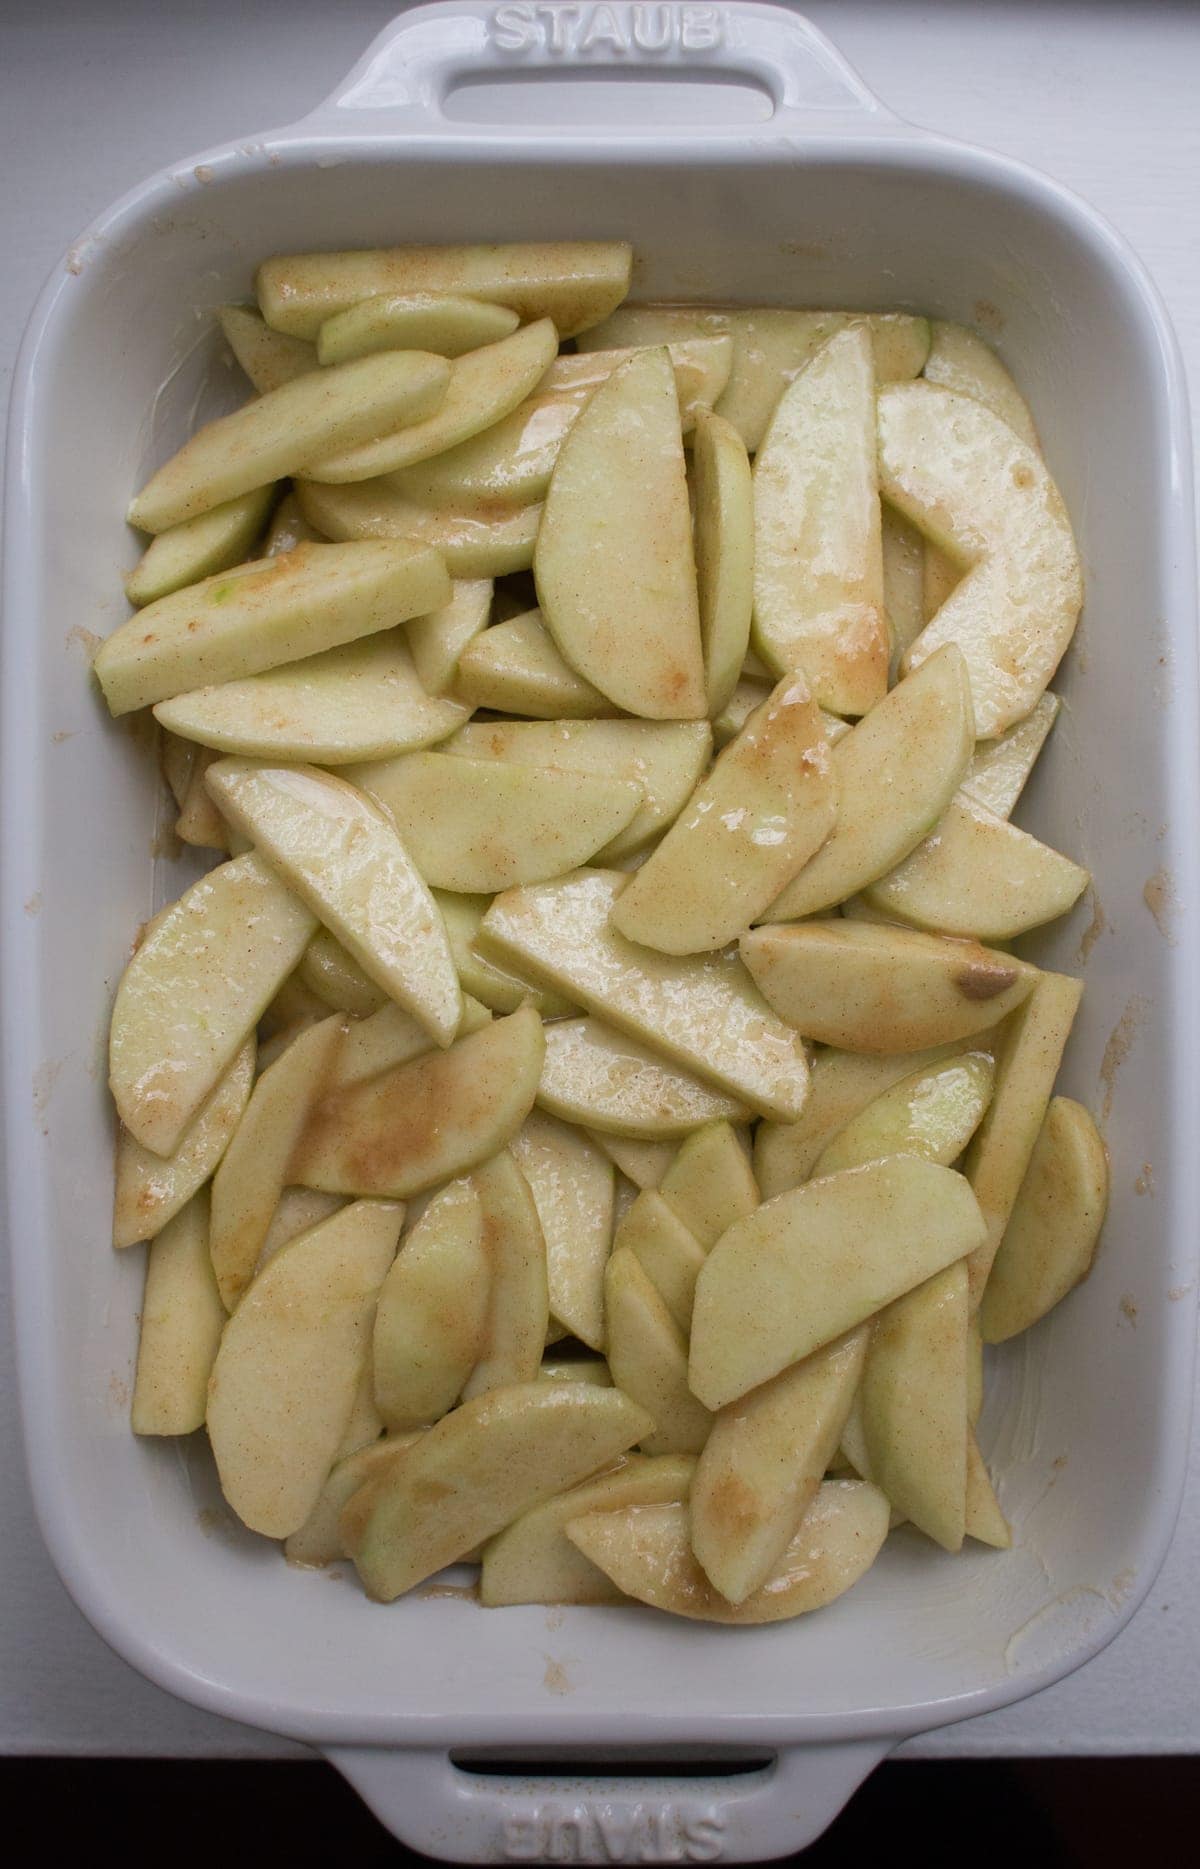 sliced apples in dish with other ingredients on top